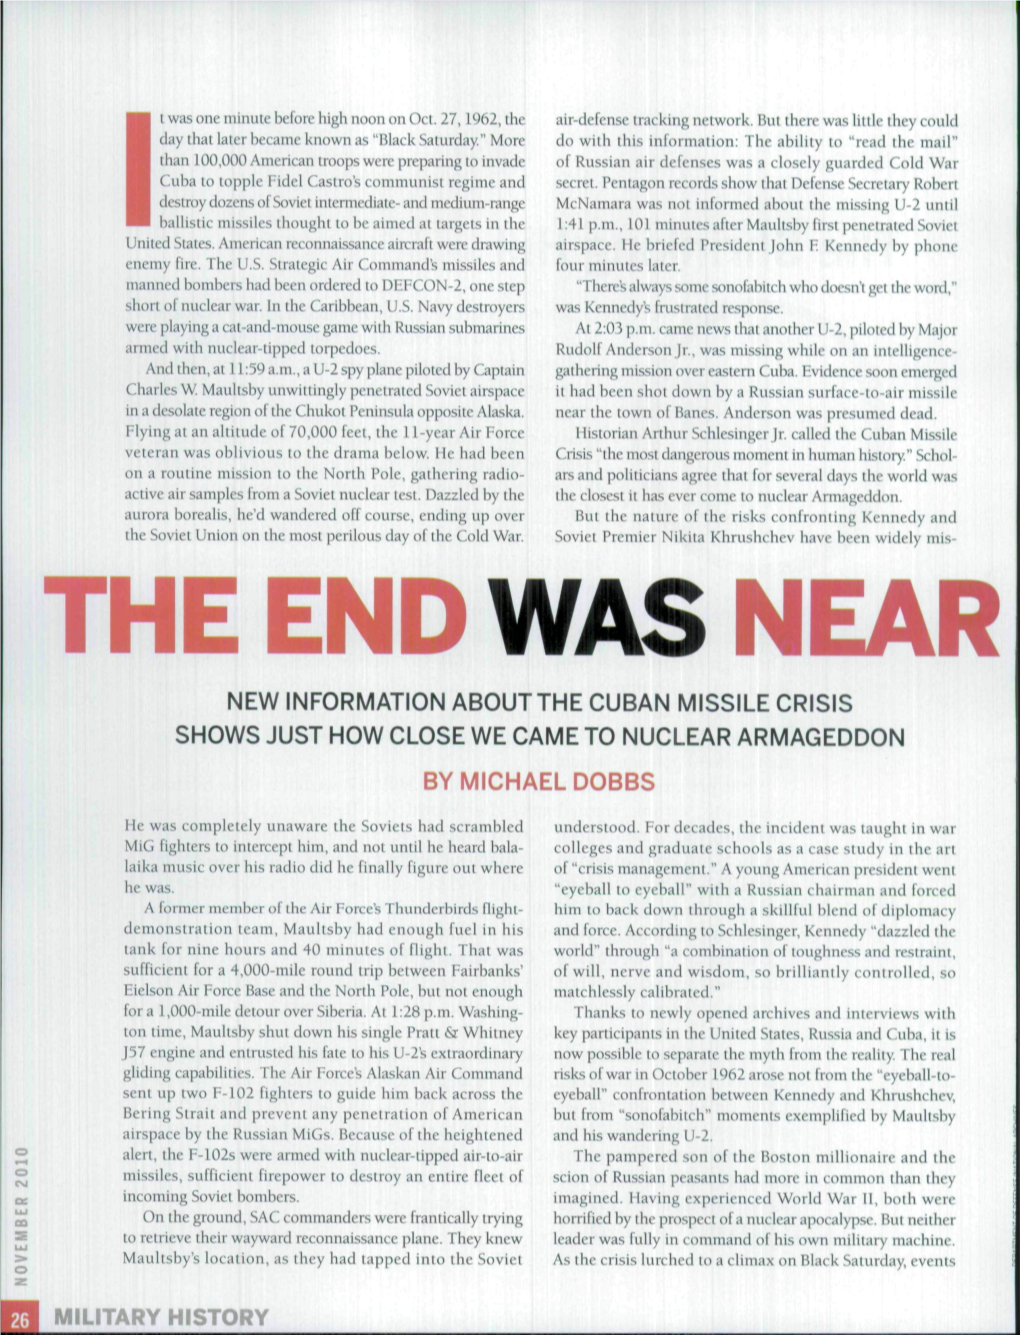 The End Was Near New Information About the Cuban Missile Crisis Shows Just How Close We Came to Nuclear Armageddon by Michael Dobbs